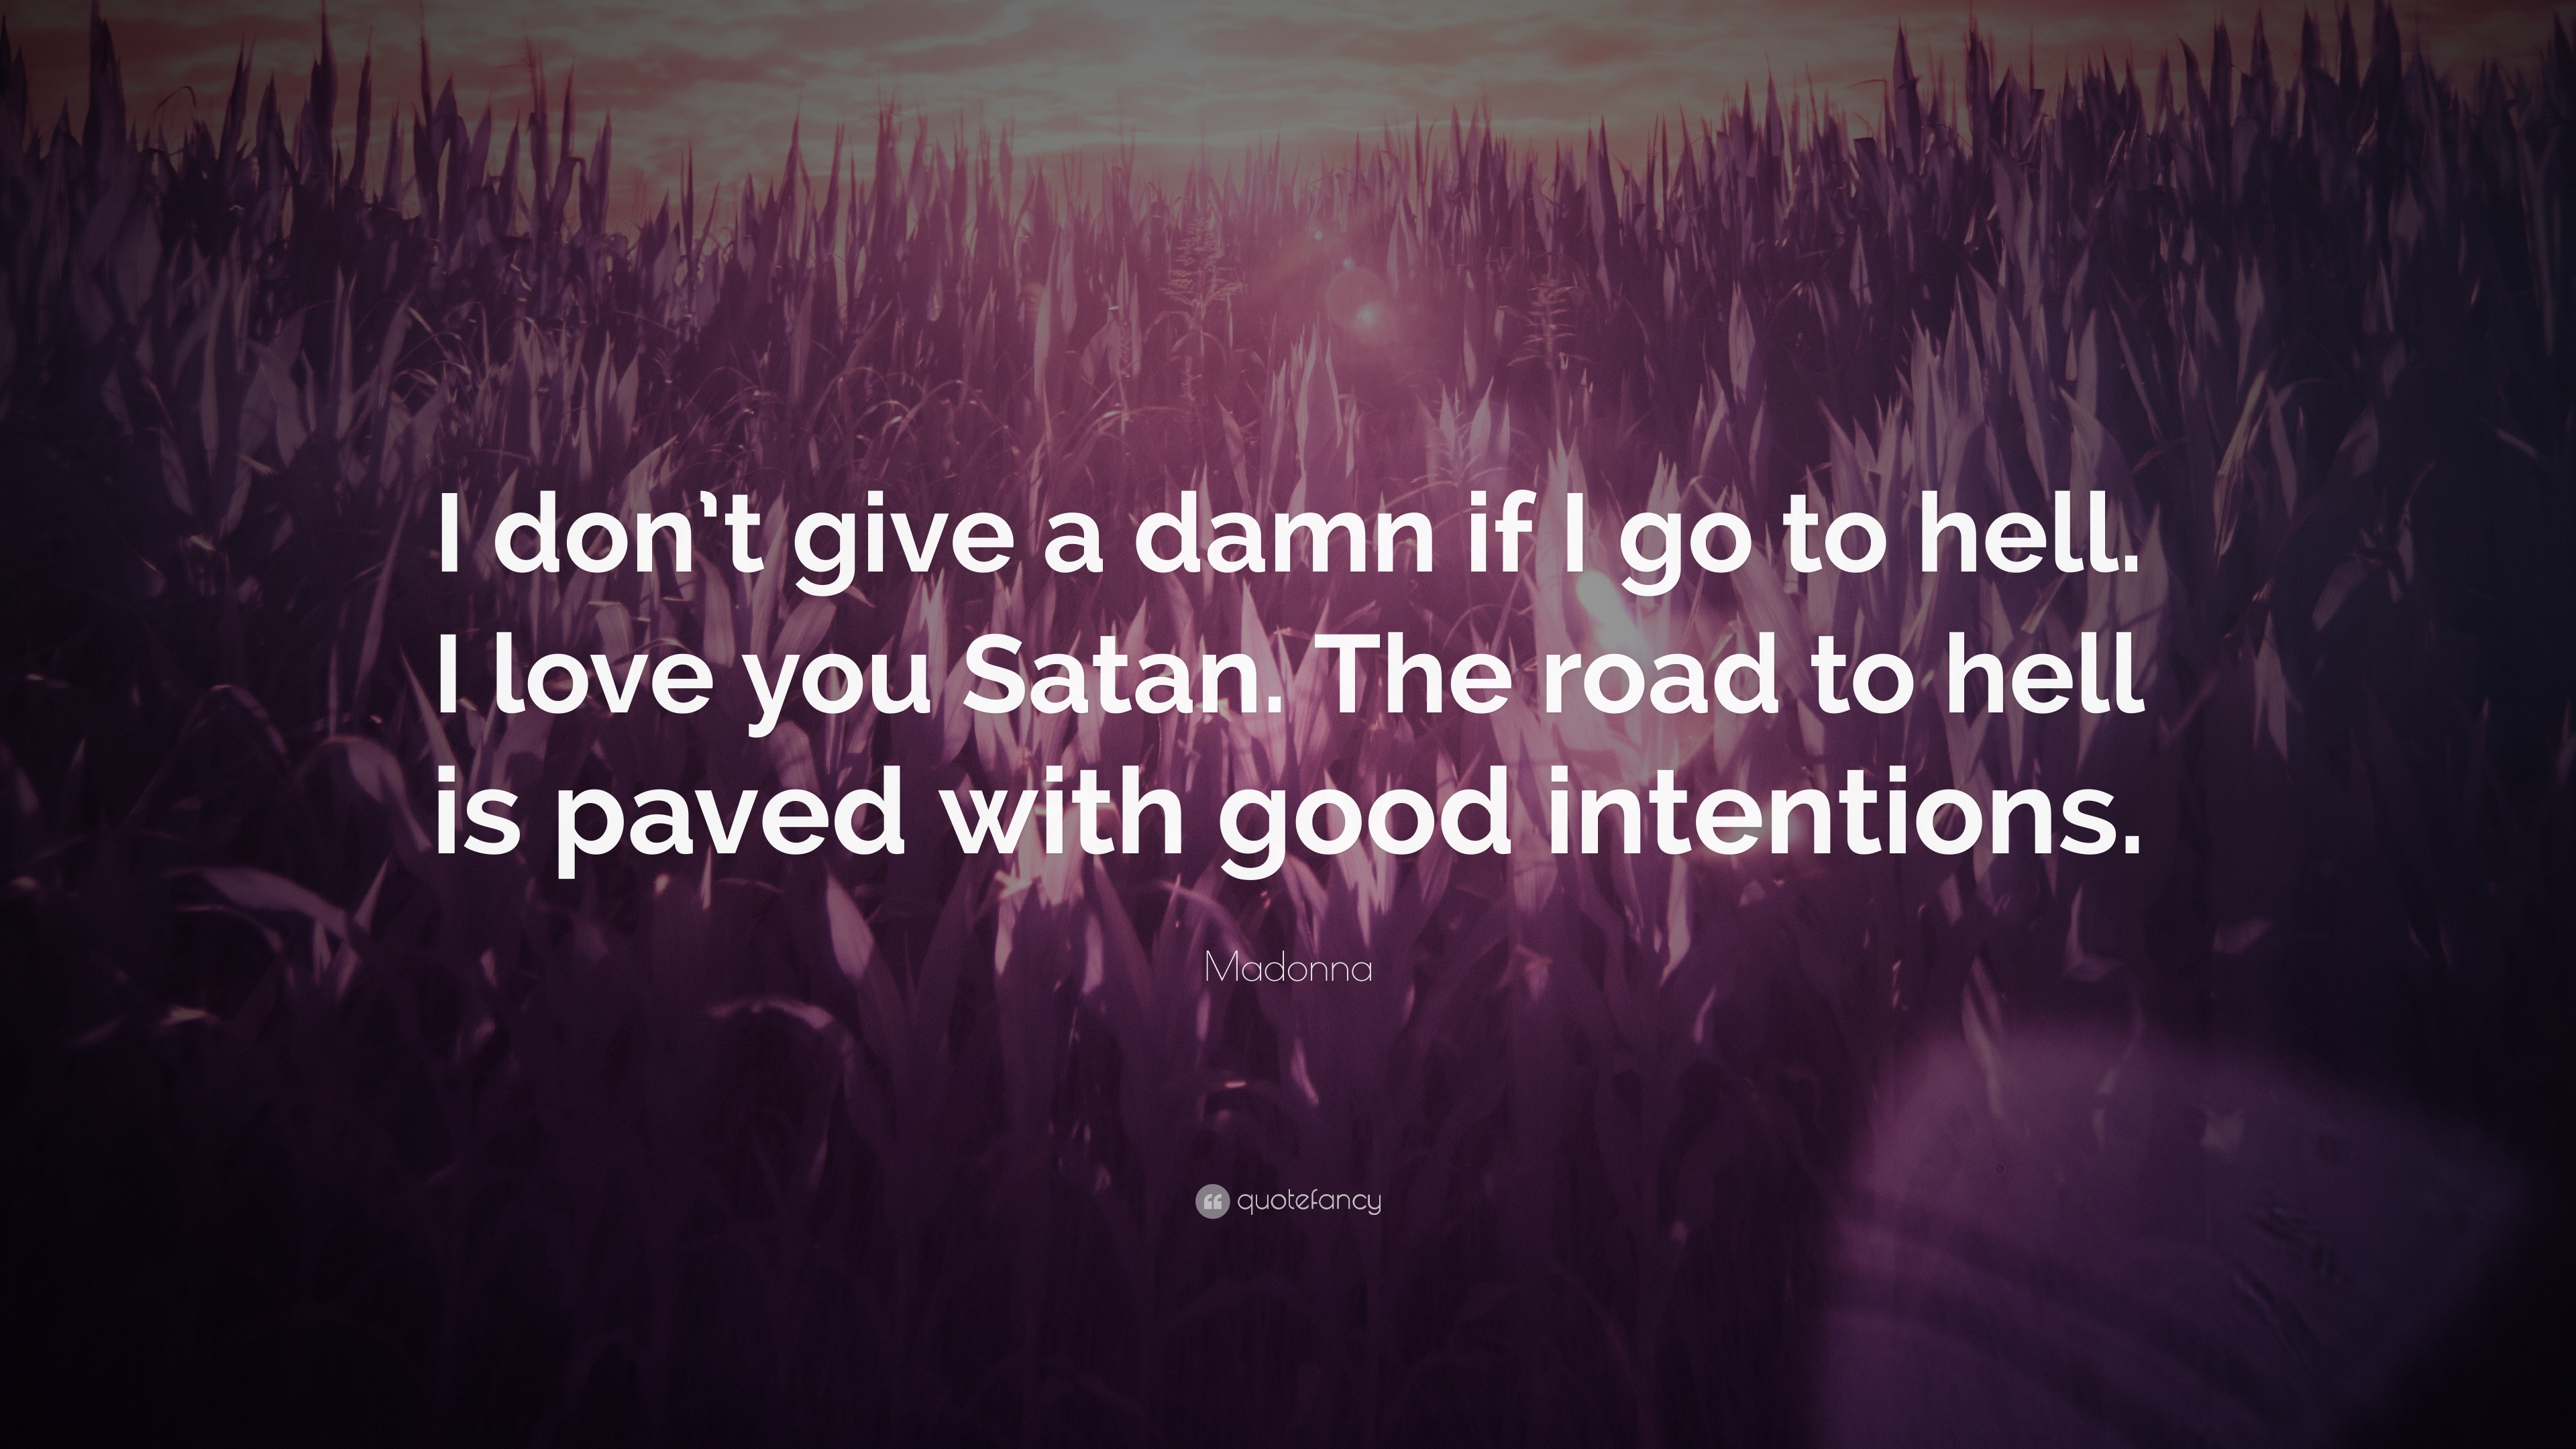 Madonna Quote “I don t give a damn if I go to hell